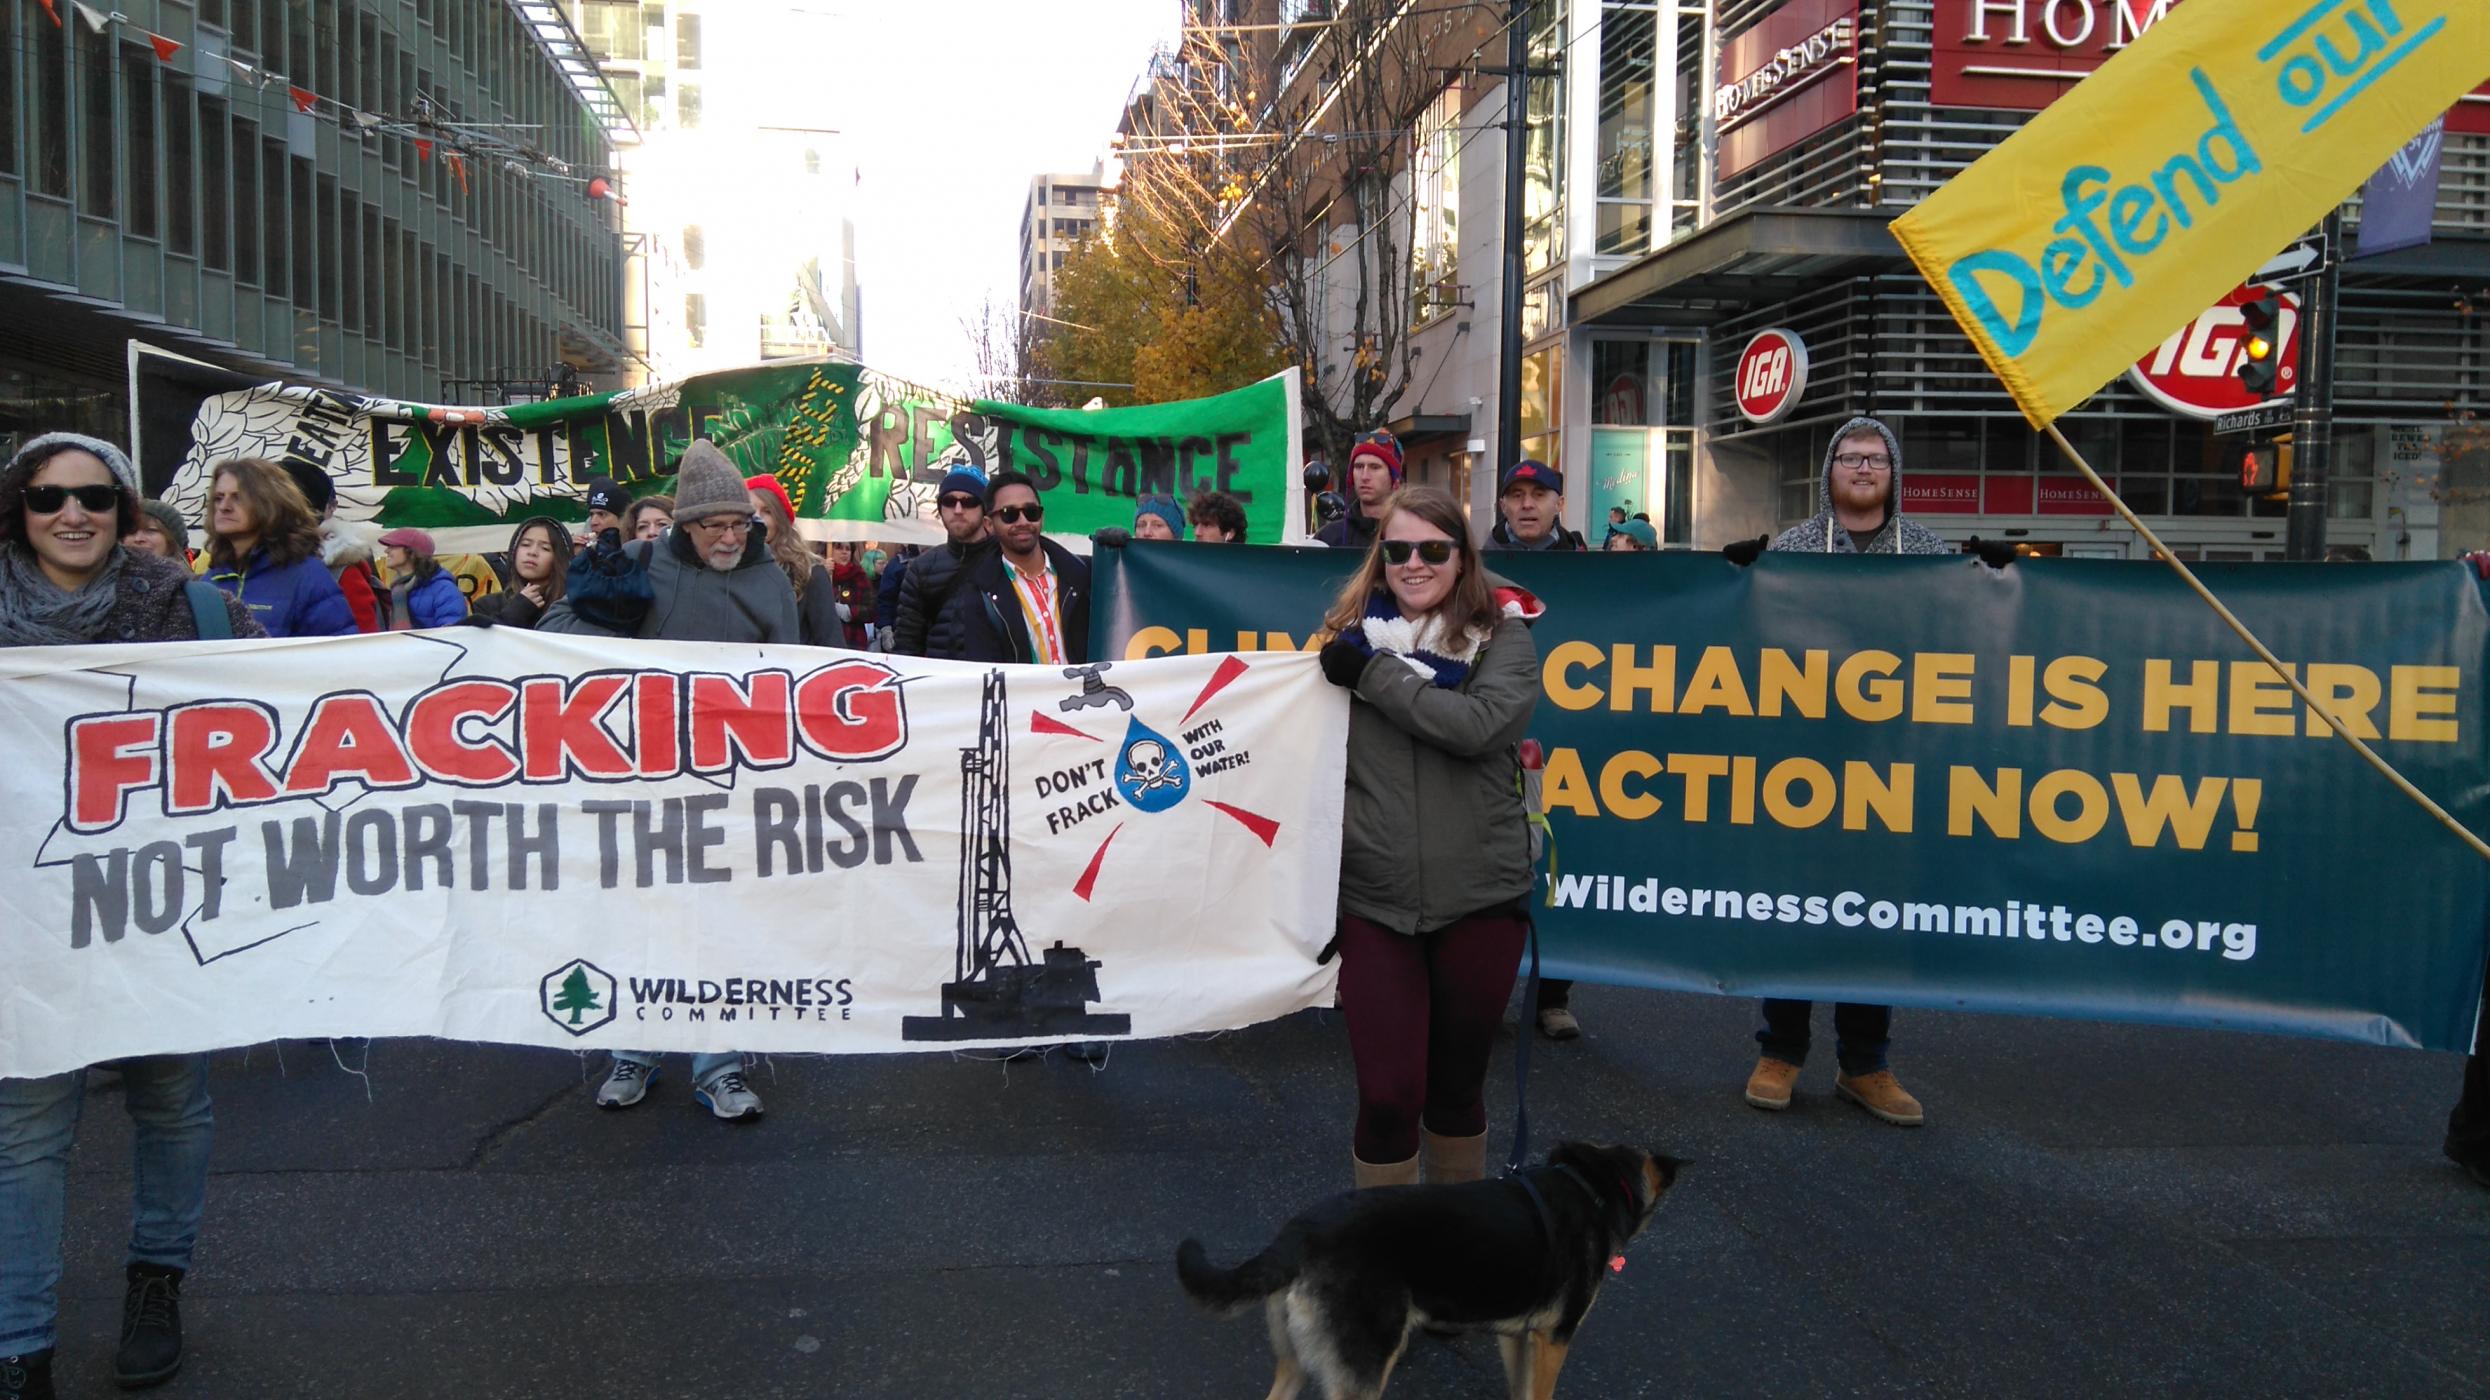 People hold banners that say "Fracking not worth the risk" and "Climate change is here, take action now!" during a march